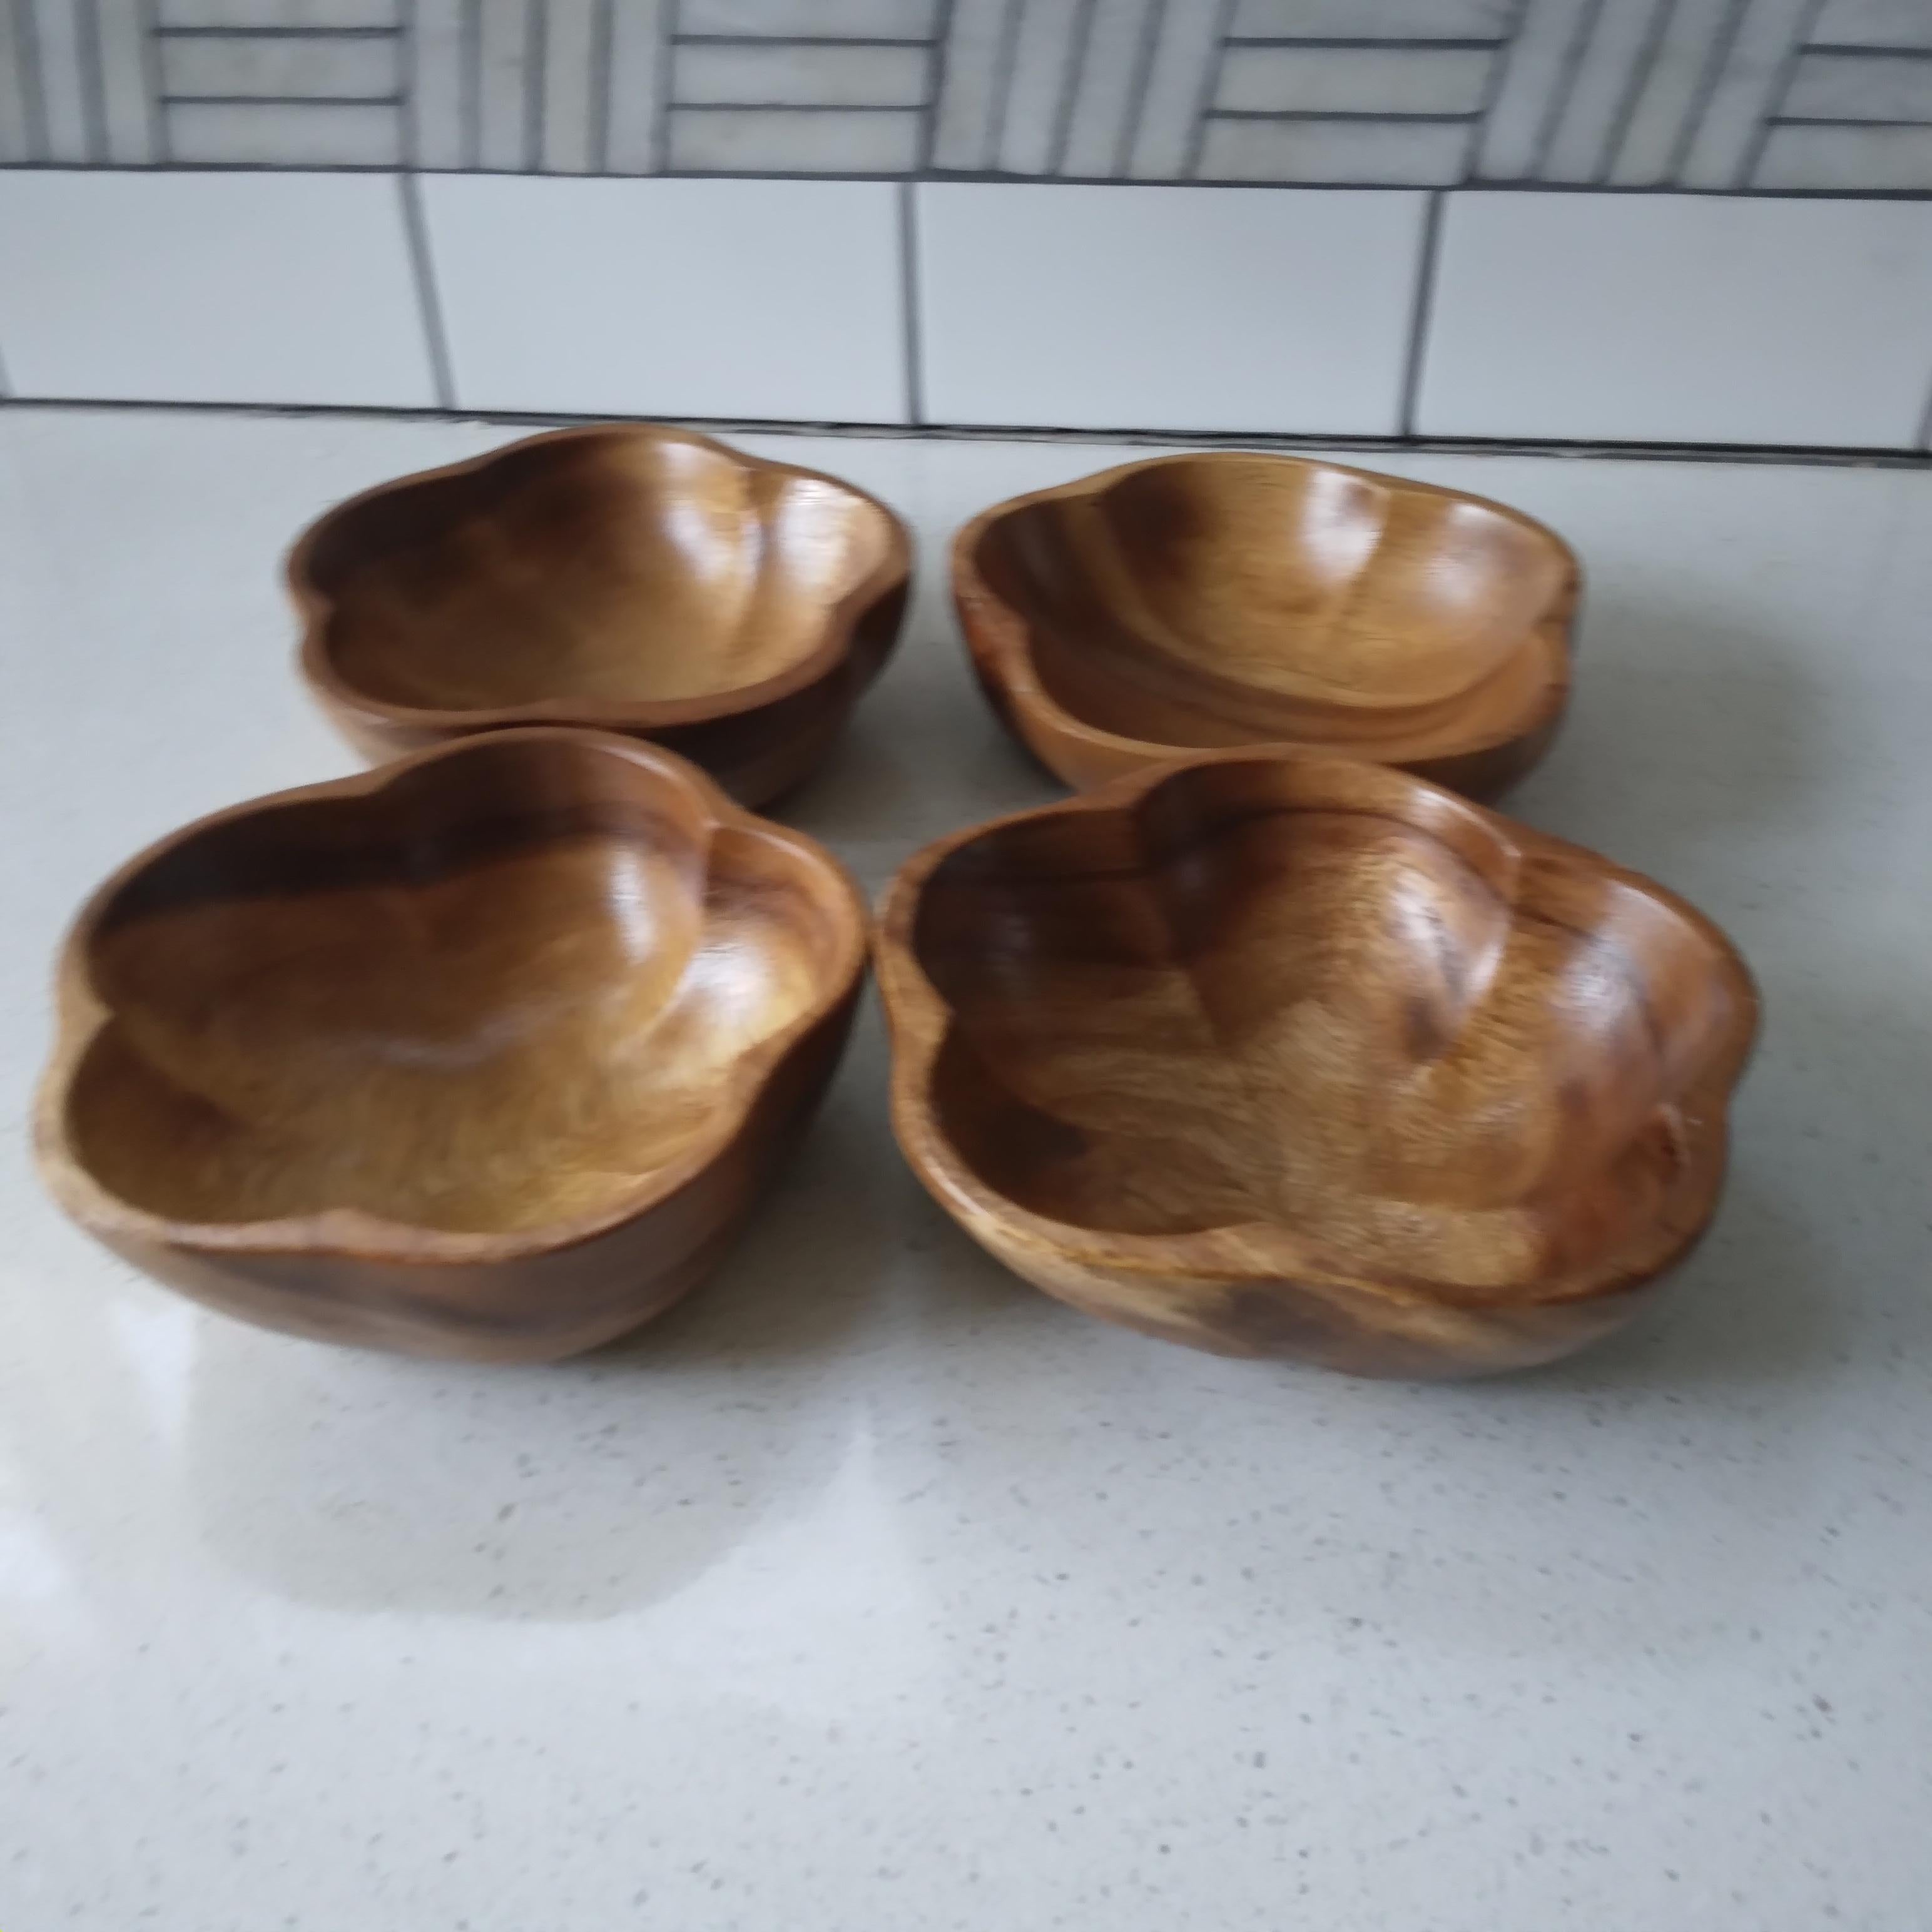 Wooden Flower Shaped Bowls - set of four In Good Condition For Sale In Munster, IN